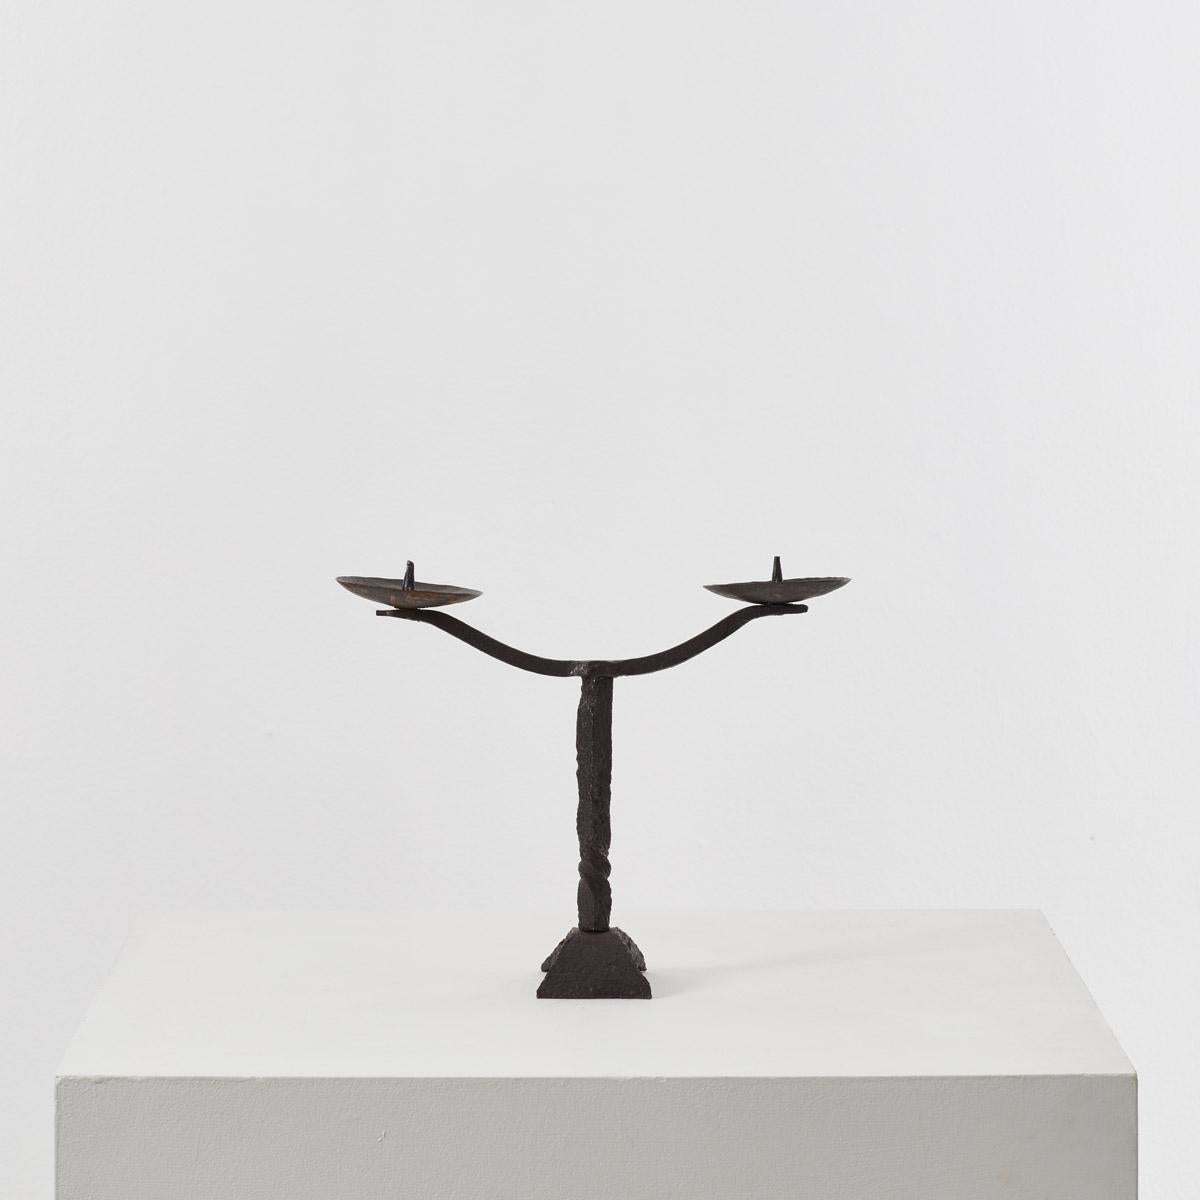 Made from iron, this two-armed candelabra has a subtle grandeur. The rough raw iron surface contrasts the grandeur of the candelabra.
